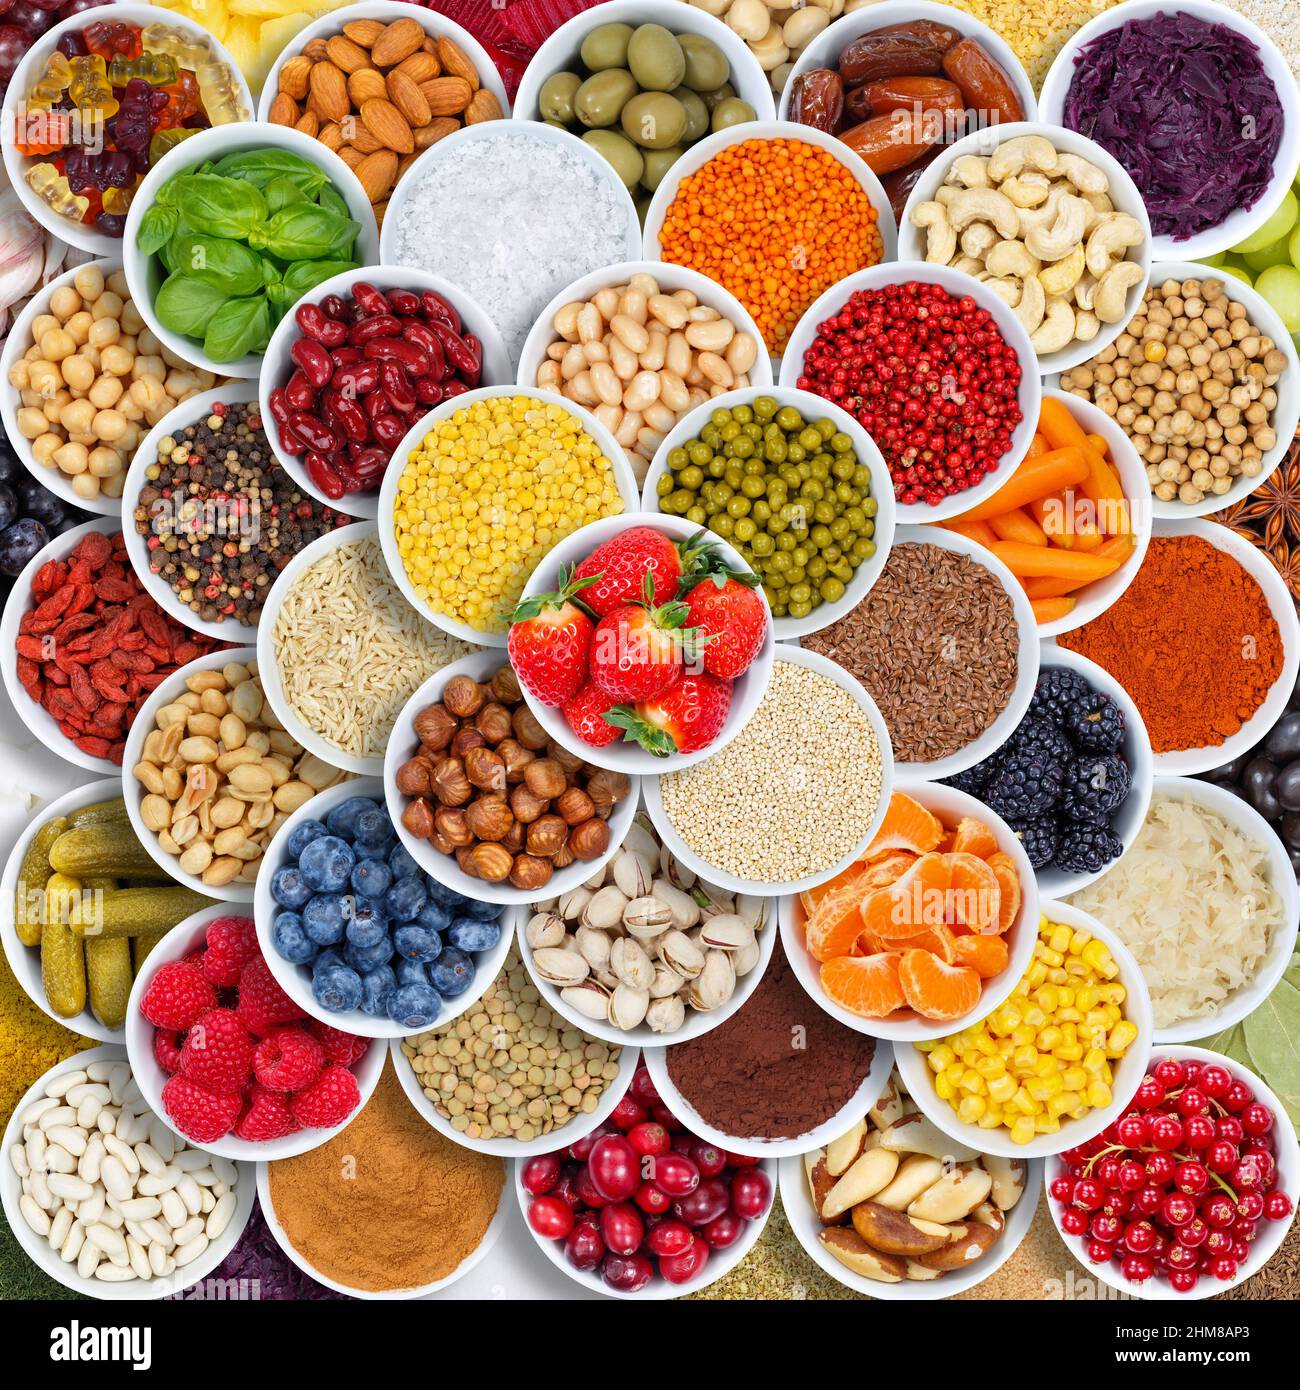 Fruits and vegetables spices ingredients berries food square grapes from above fruit Stock Photo